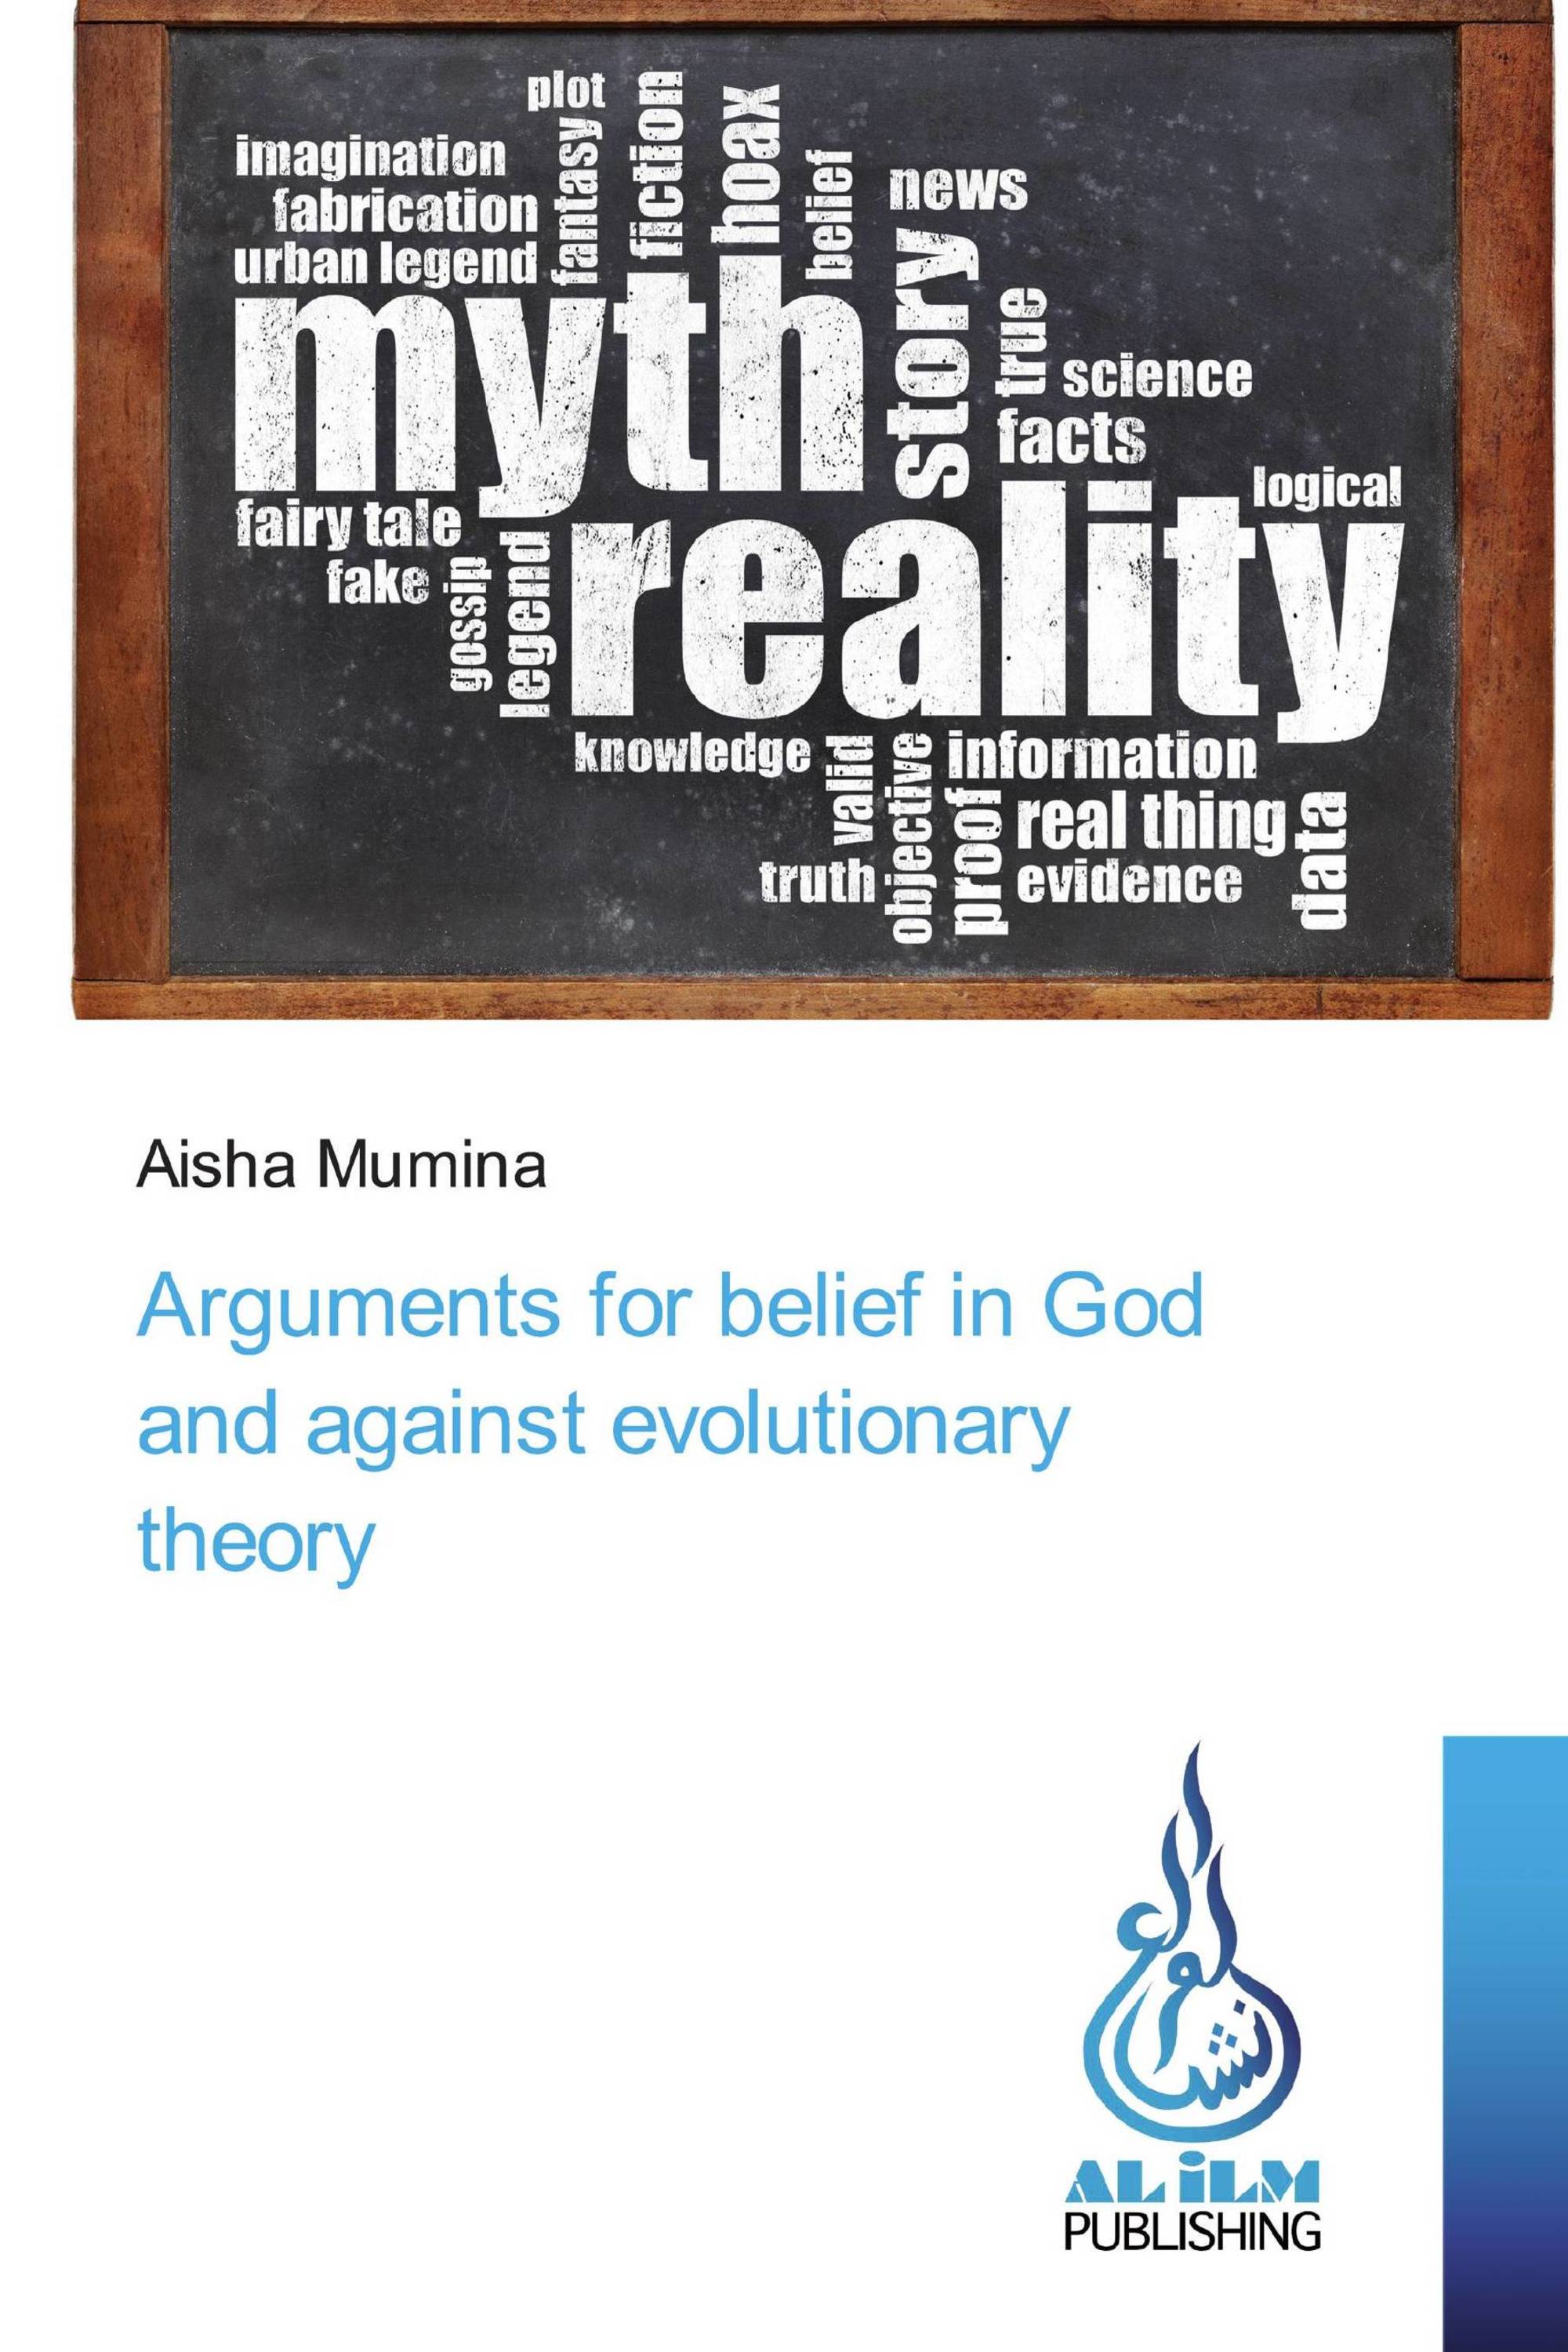 Arguments for belief in God and against evolutionary theory